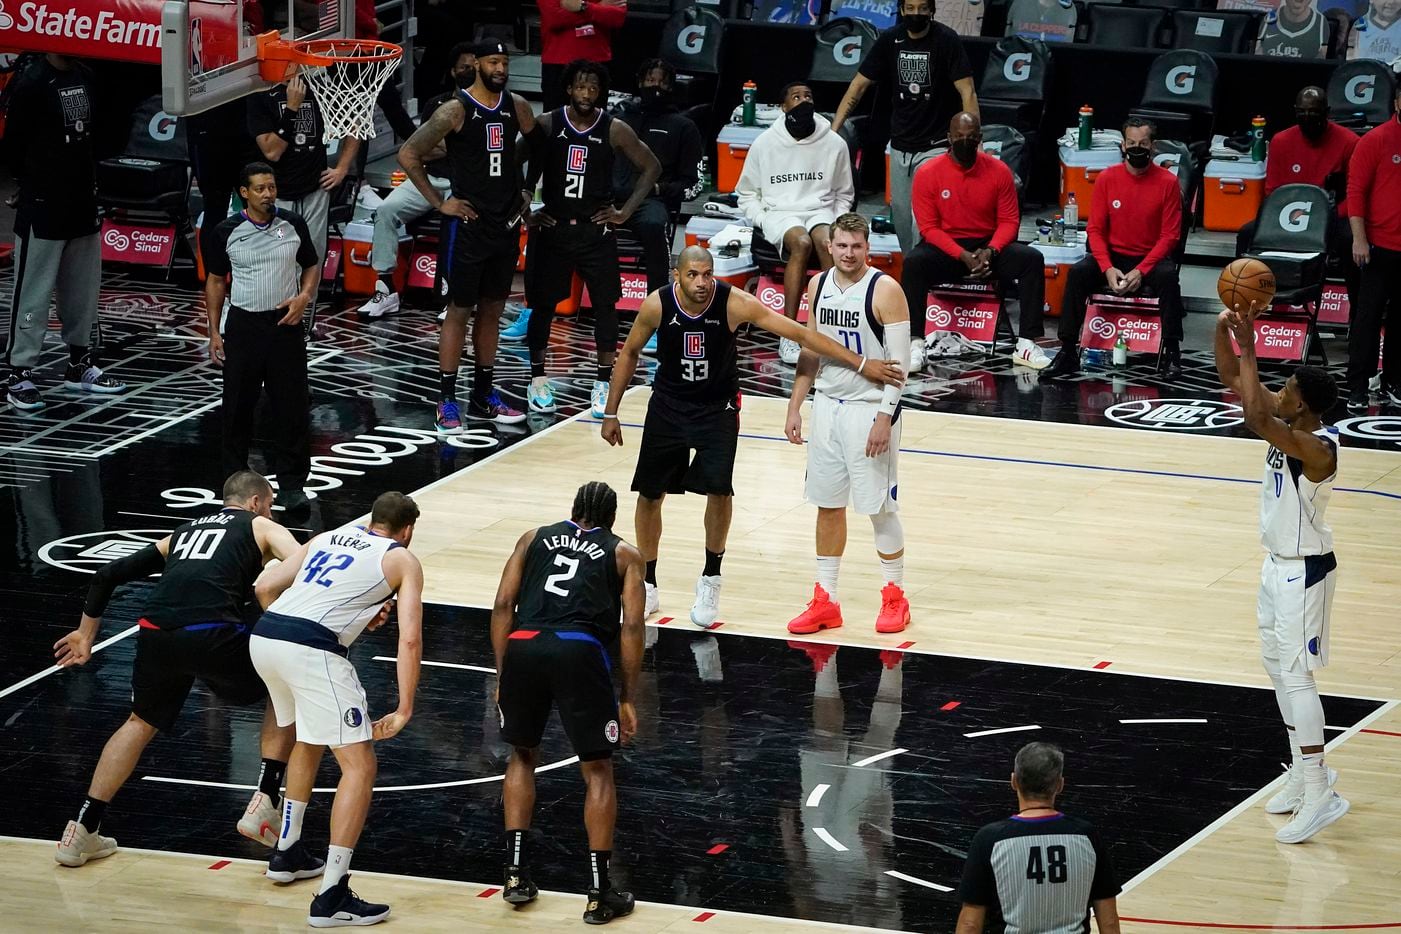 Dallas Mavericks guard Josh Richardson (0) shoots a free throw during the second half of an NBA playoff basketball game against the LA Clippers at Staples Center on Wednesday, May 26, 2021, in Los Angeles. The Mavericks won the game 127-121.